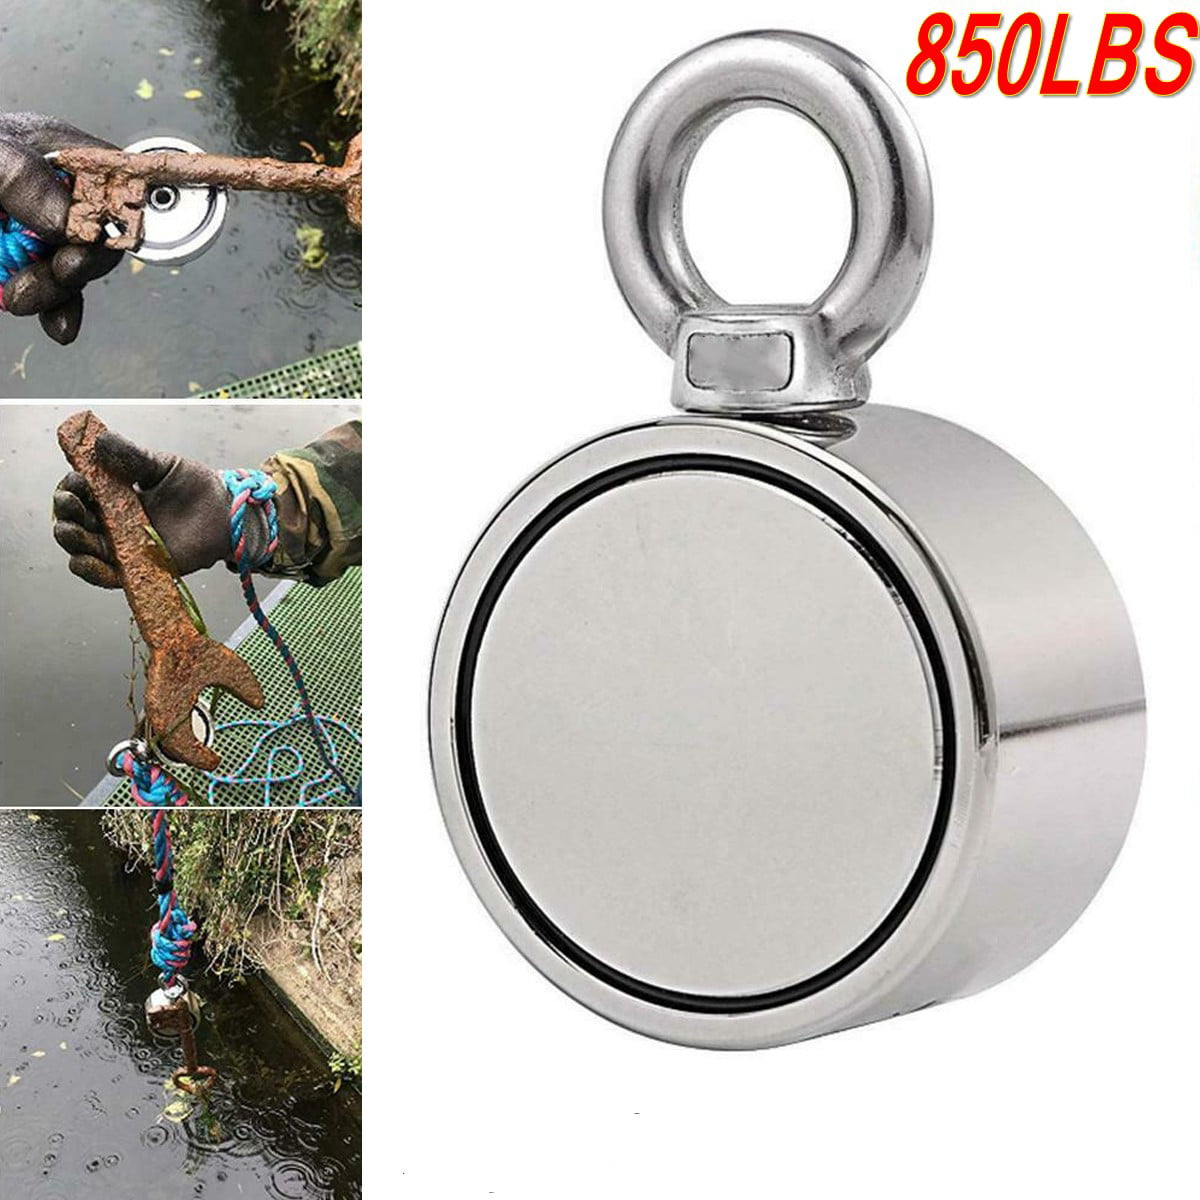 850LBS Fishing Big Double Ring Magnet Kit Pulling Force Strong Neodymium 